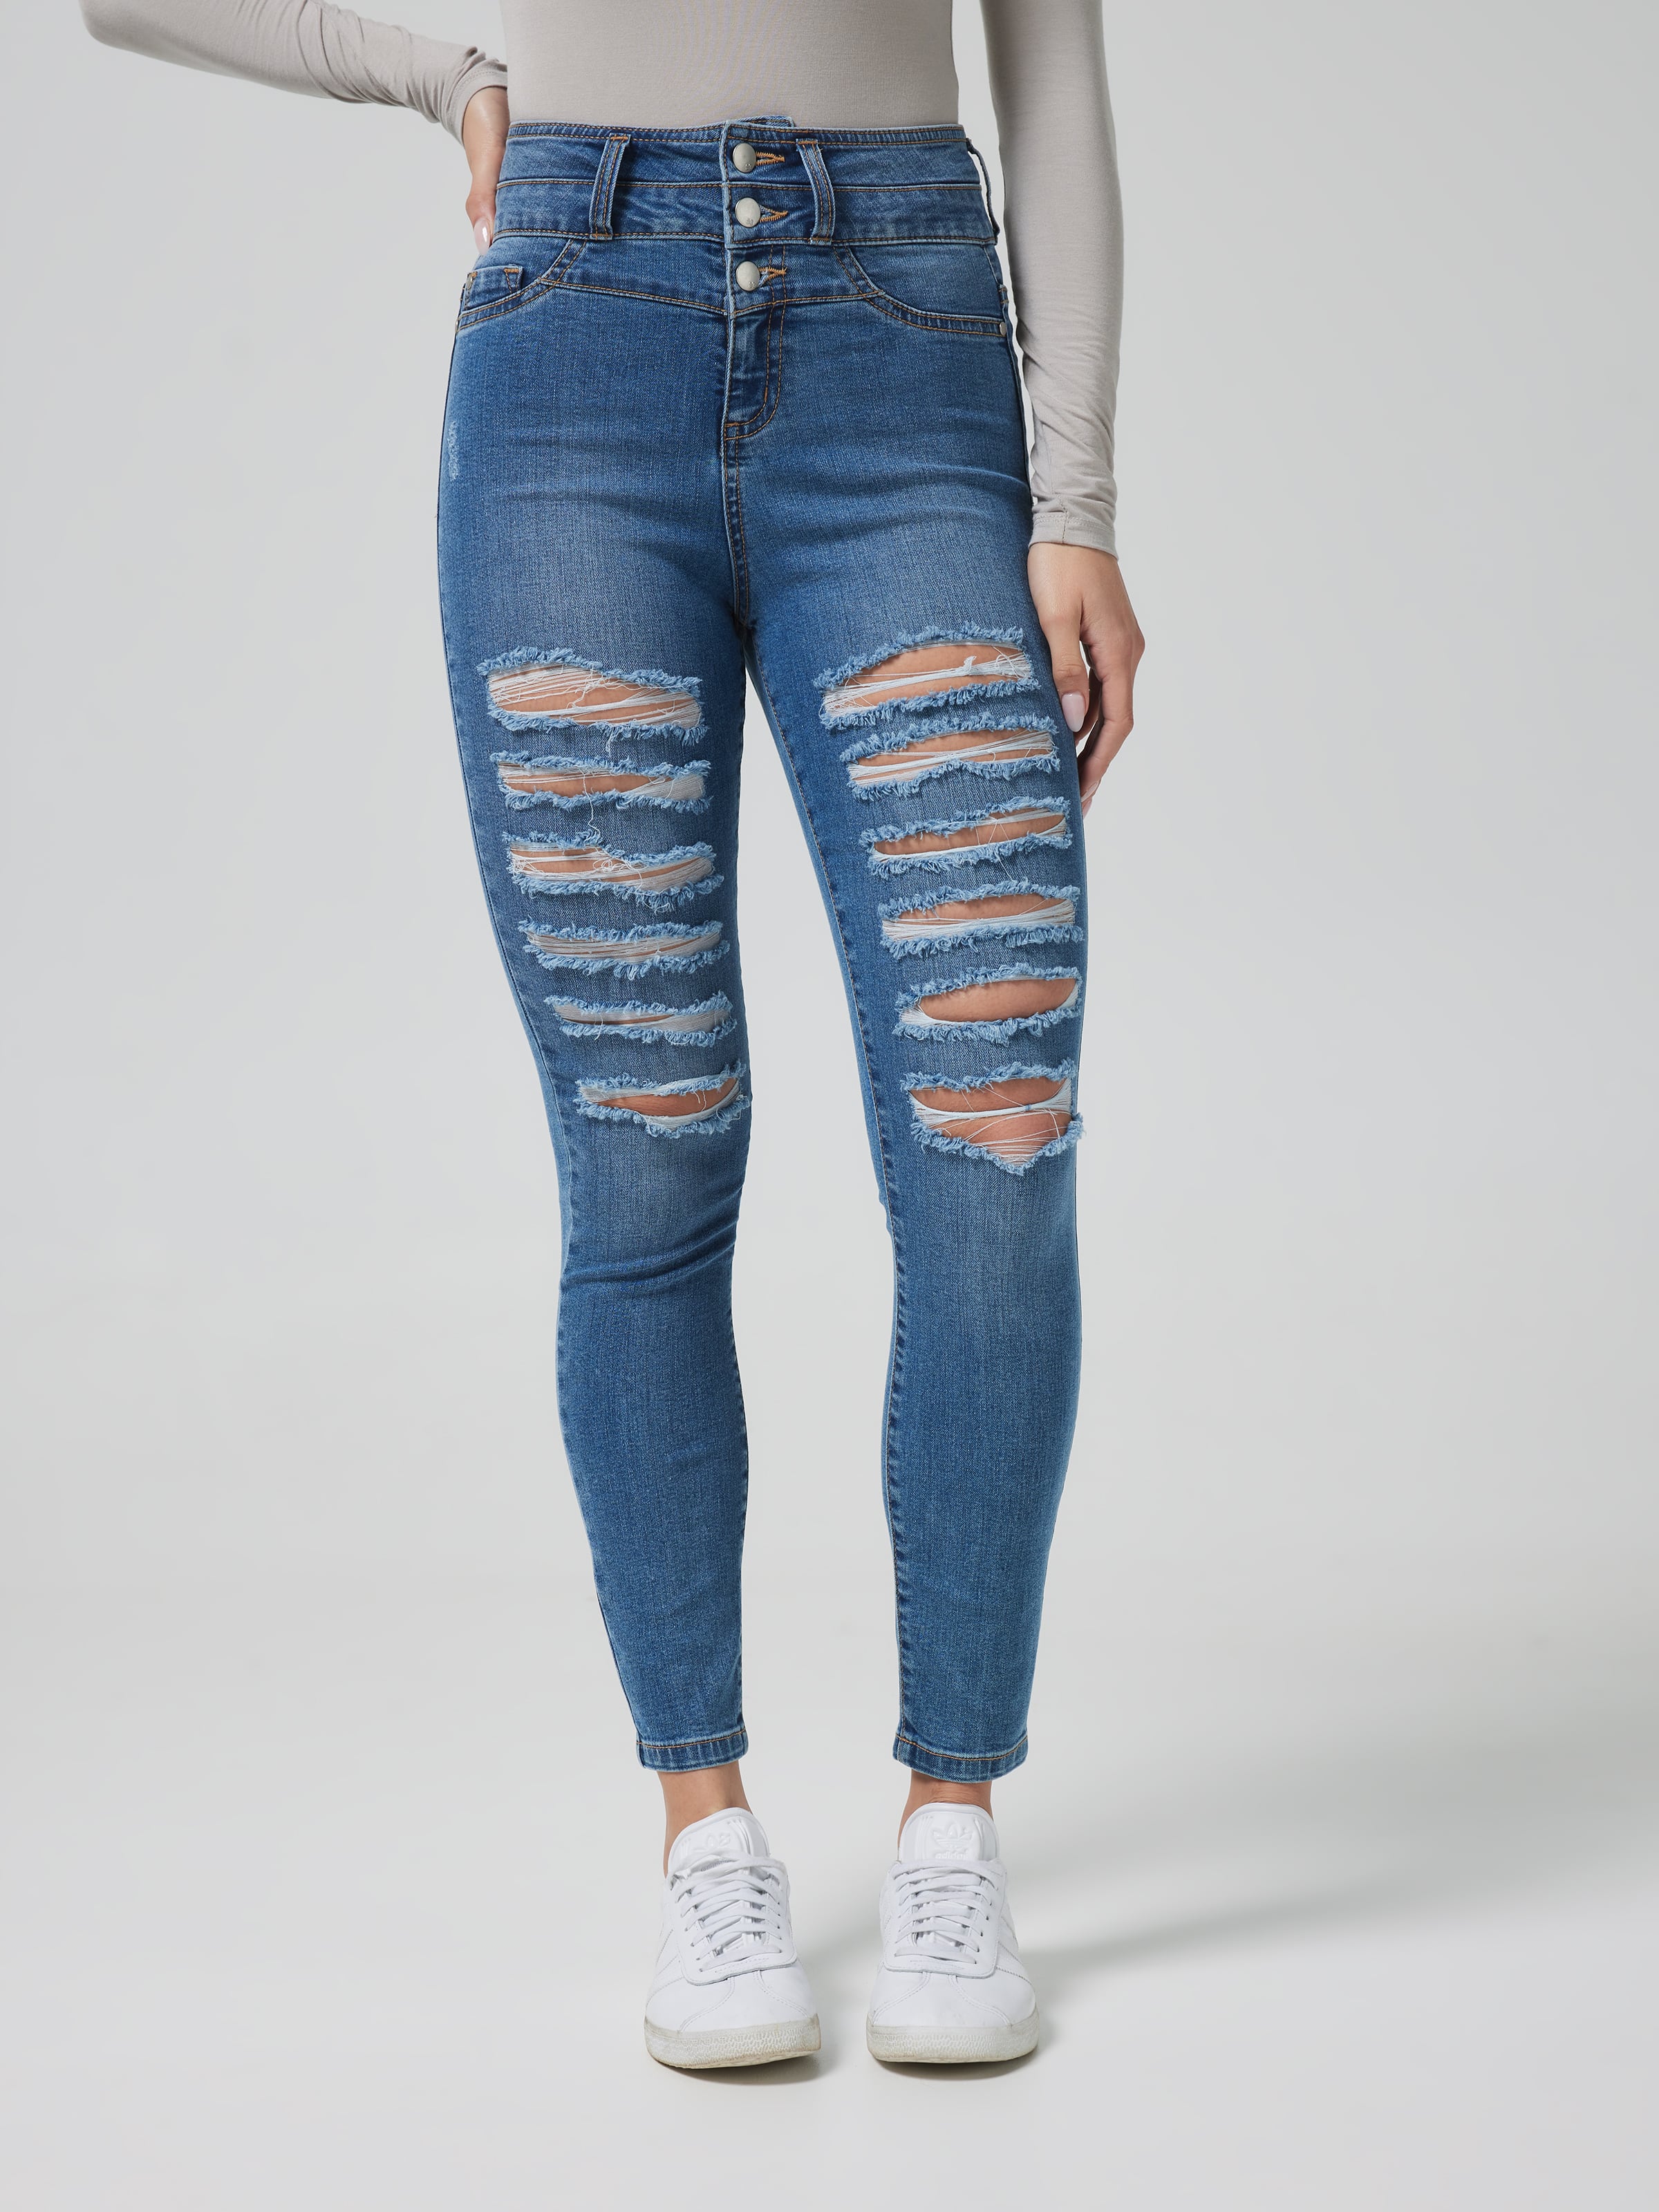 Slouchy Wide-Leg Ripped Jeans for Toddler Girls